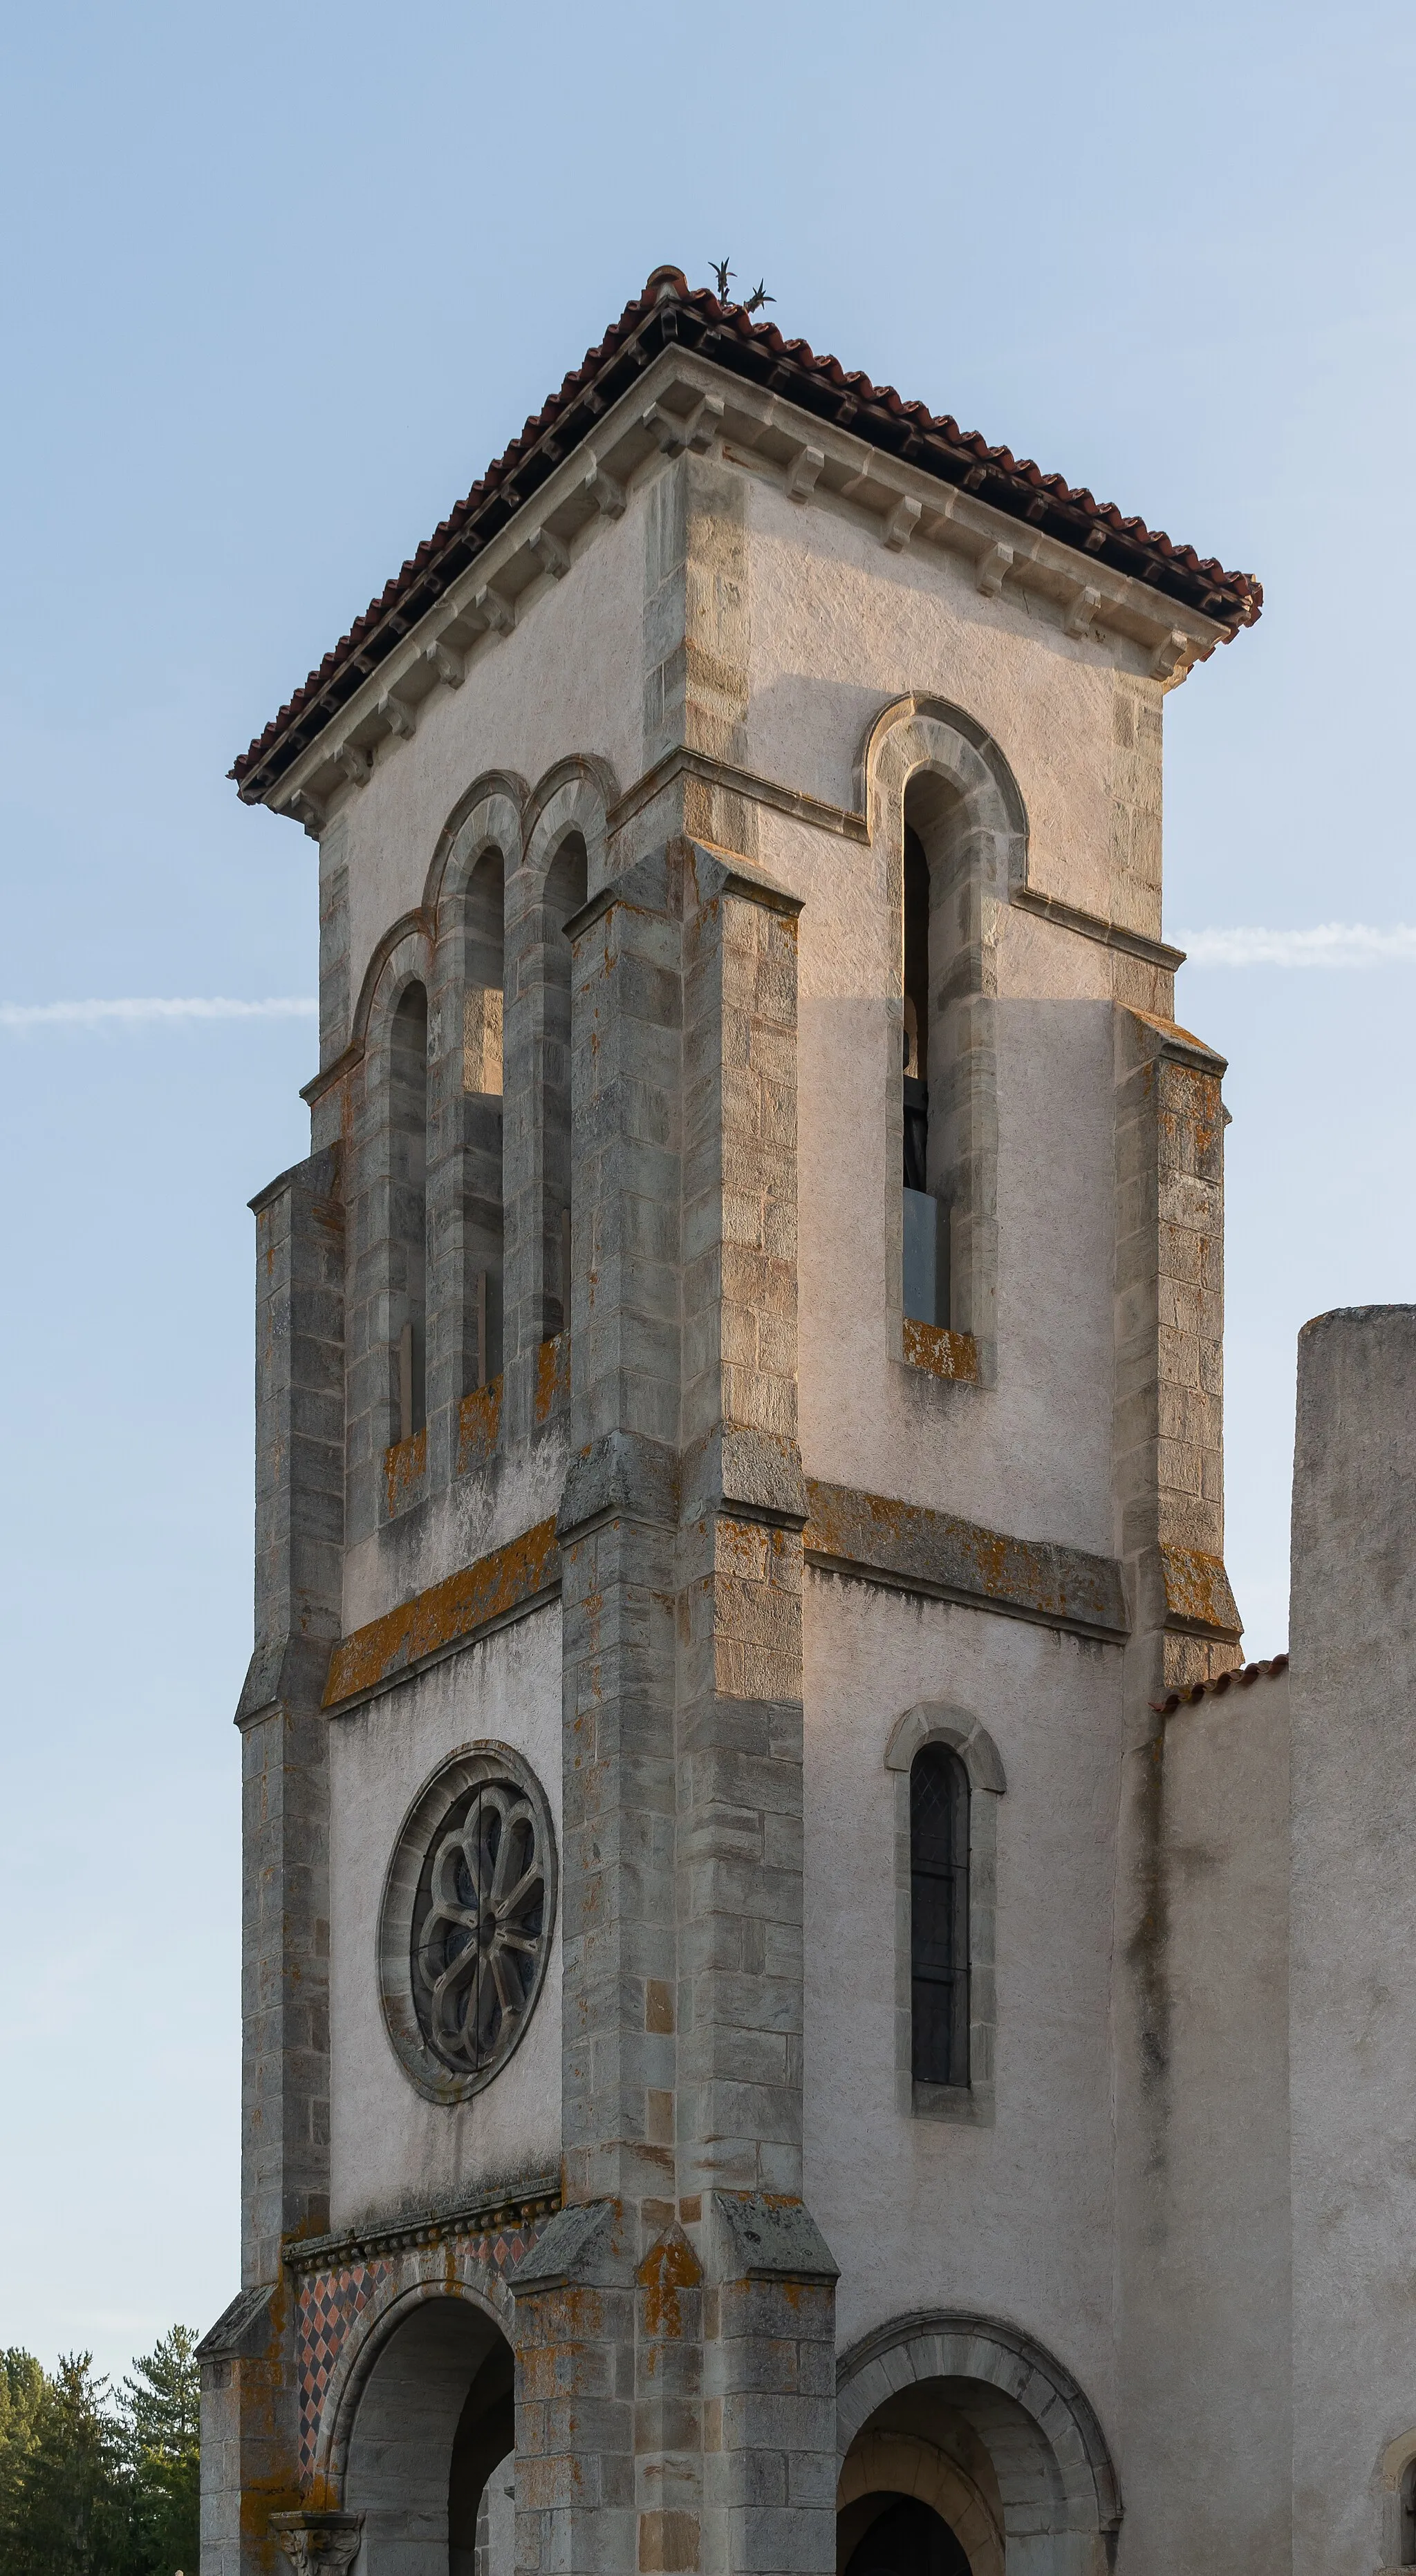 Photo showing: Bell tower of the Saints Agricola and Vitalis church in Bulhon, Puy-de-Dôme, France